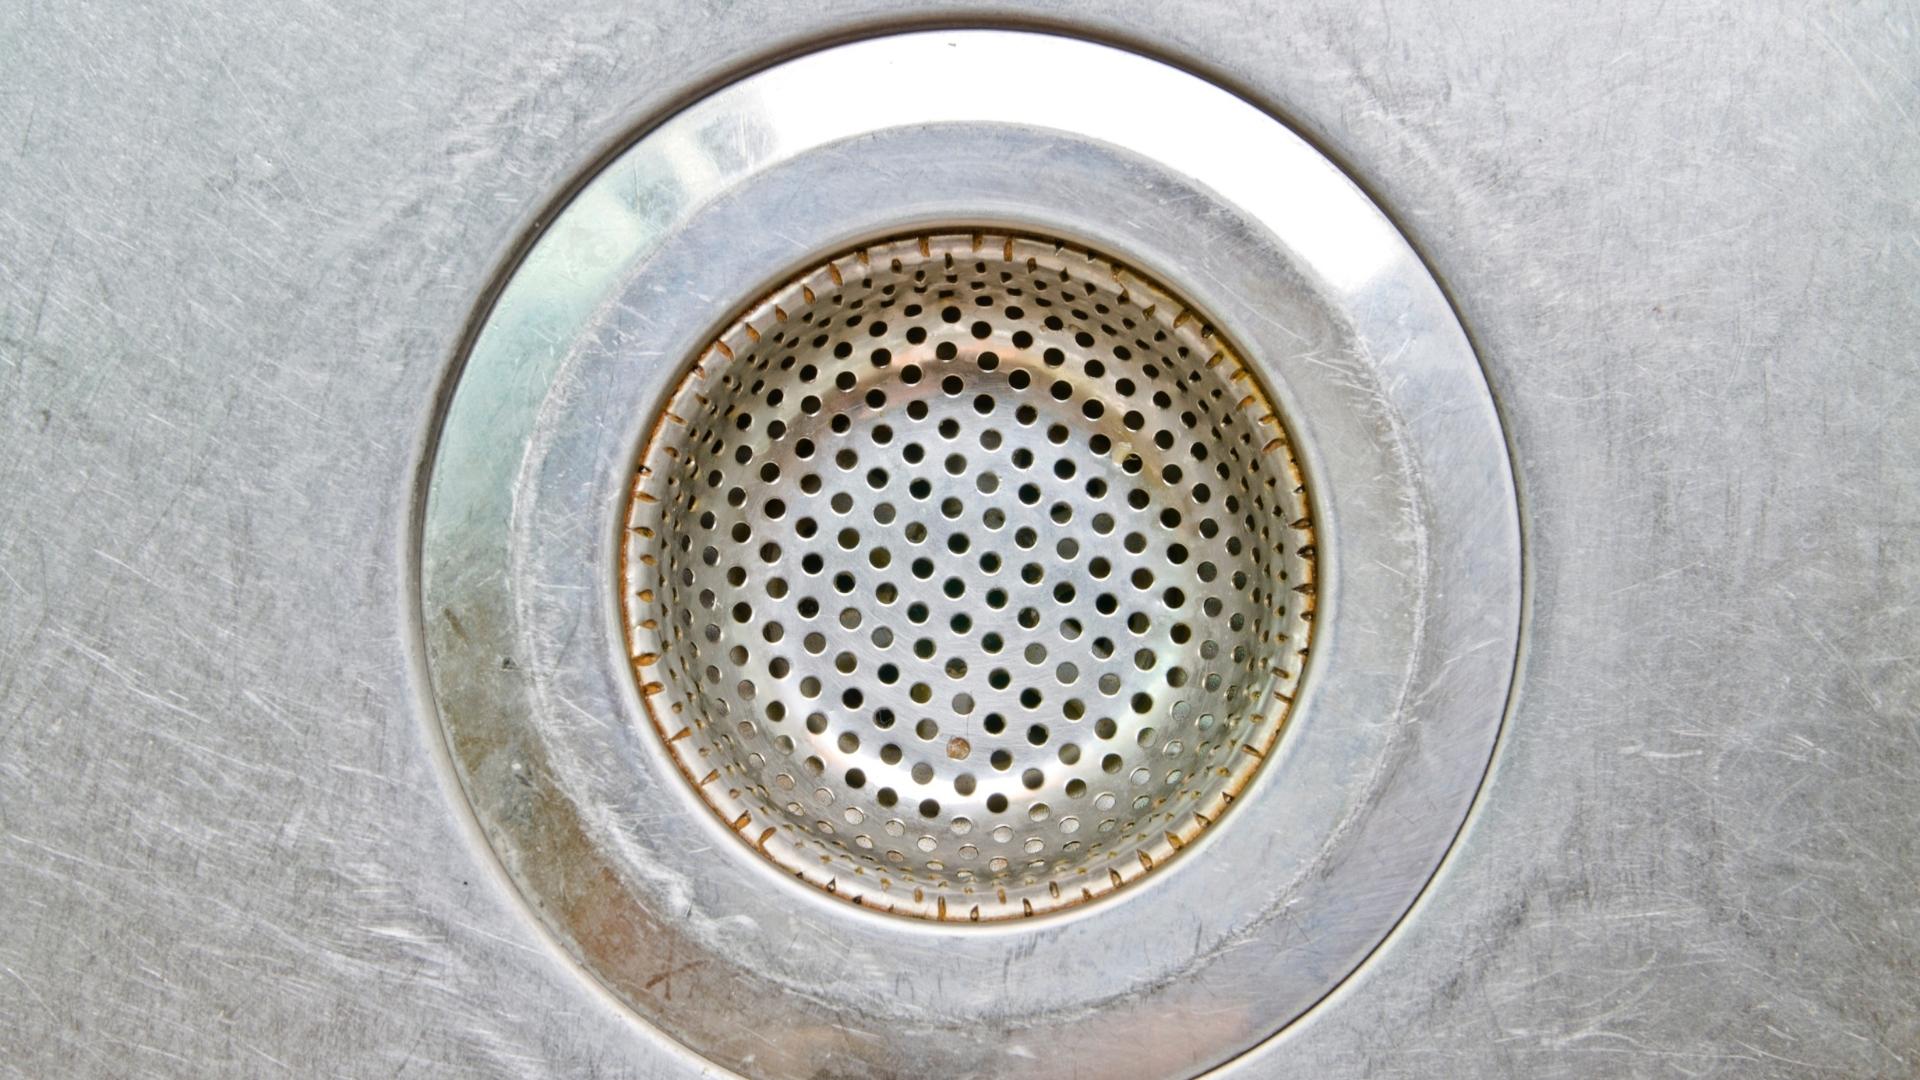 The RV Stainless Steel Sink: How to Clean It & Remove Scratches